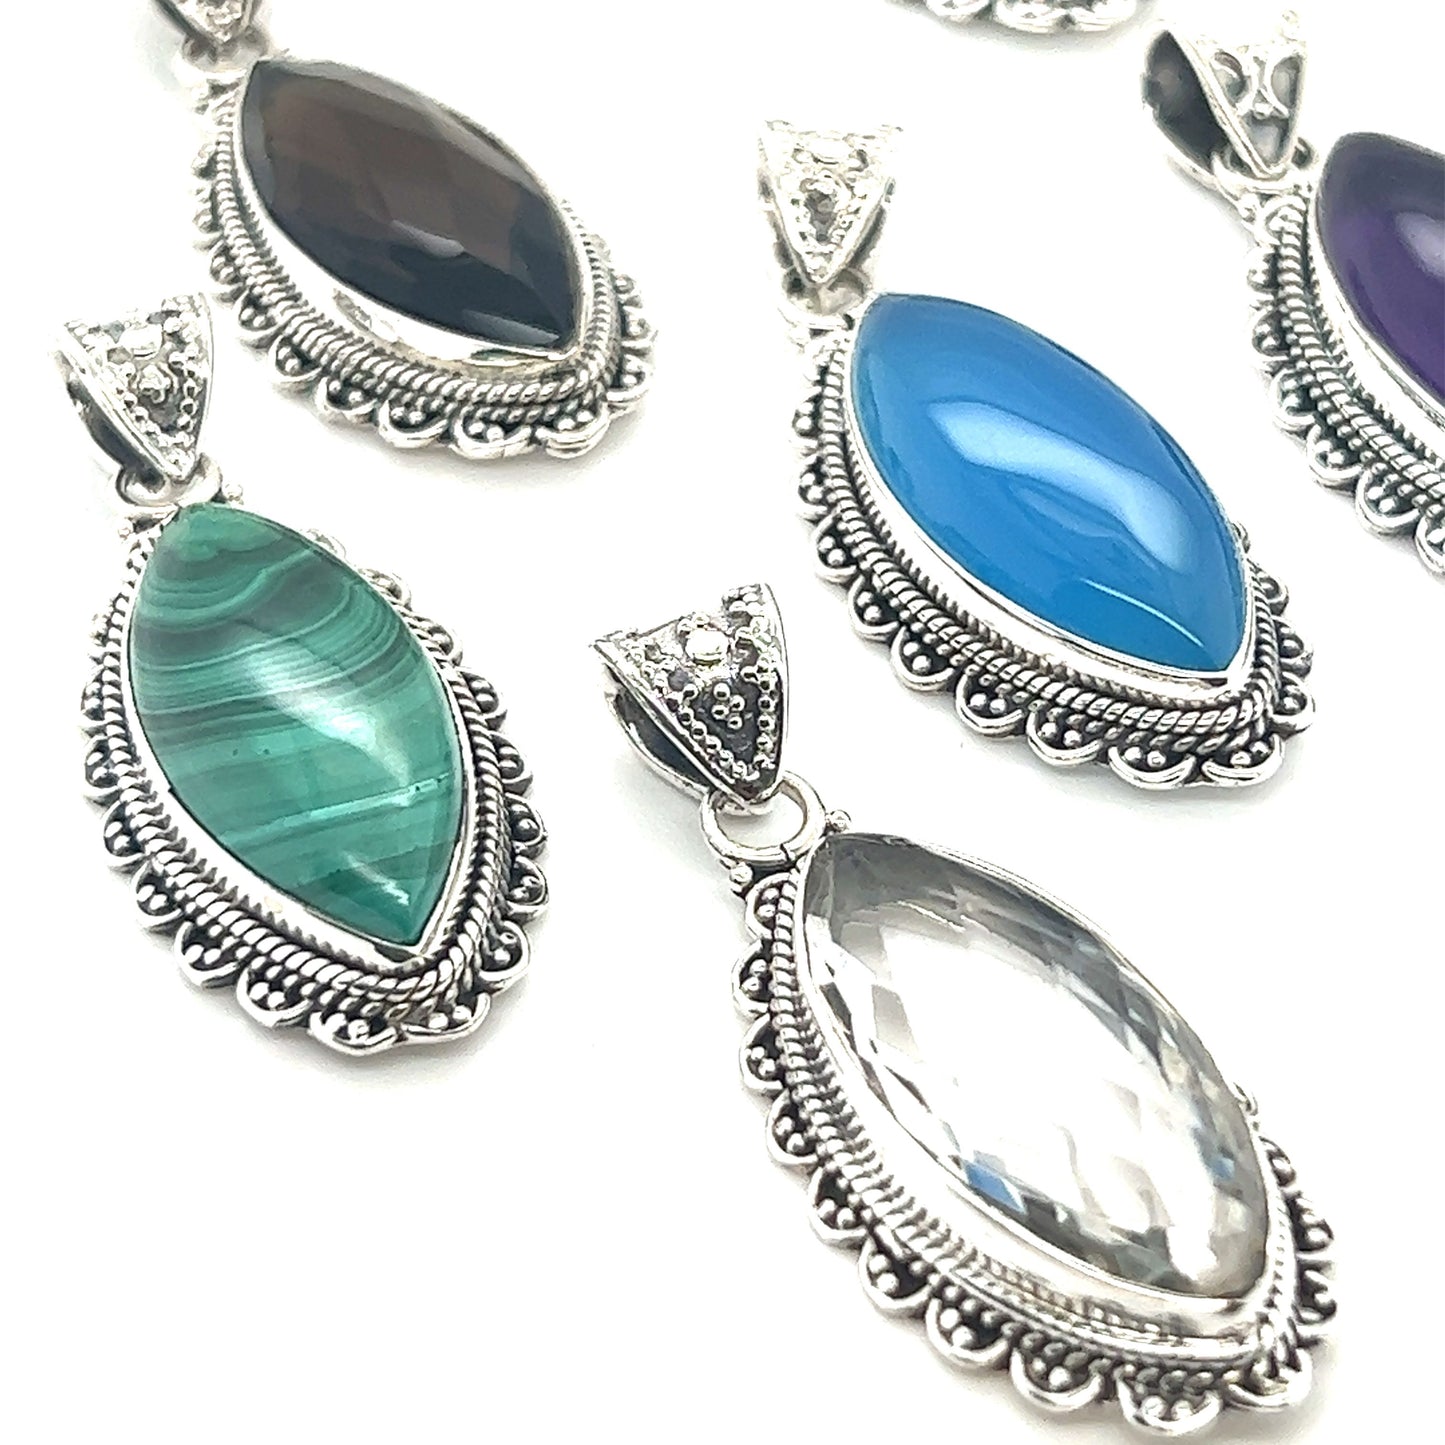 A collection of Super Silver Marquise Shaped Gemstone Pendants on a clean white background.